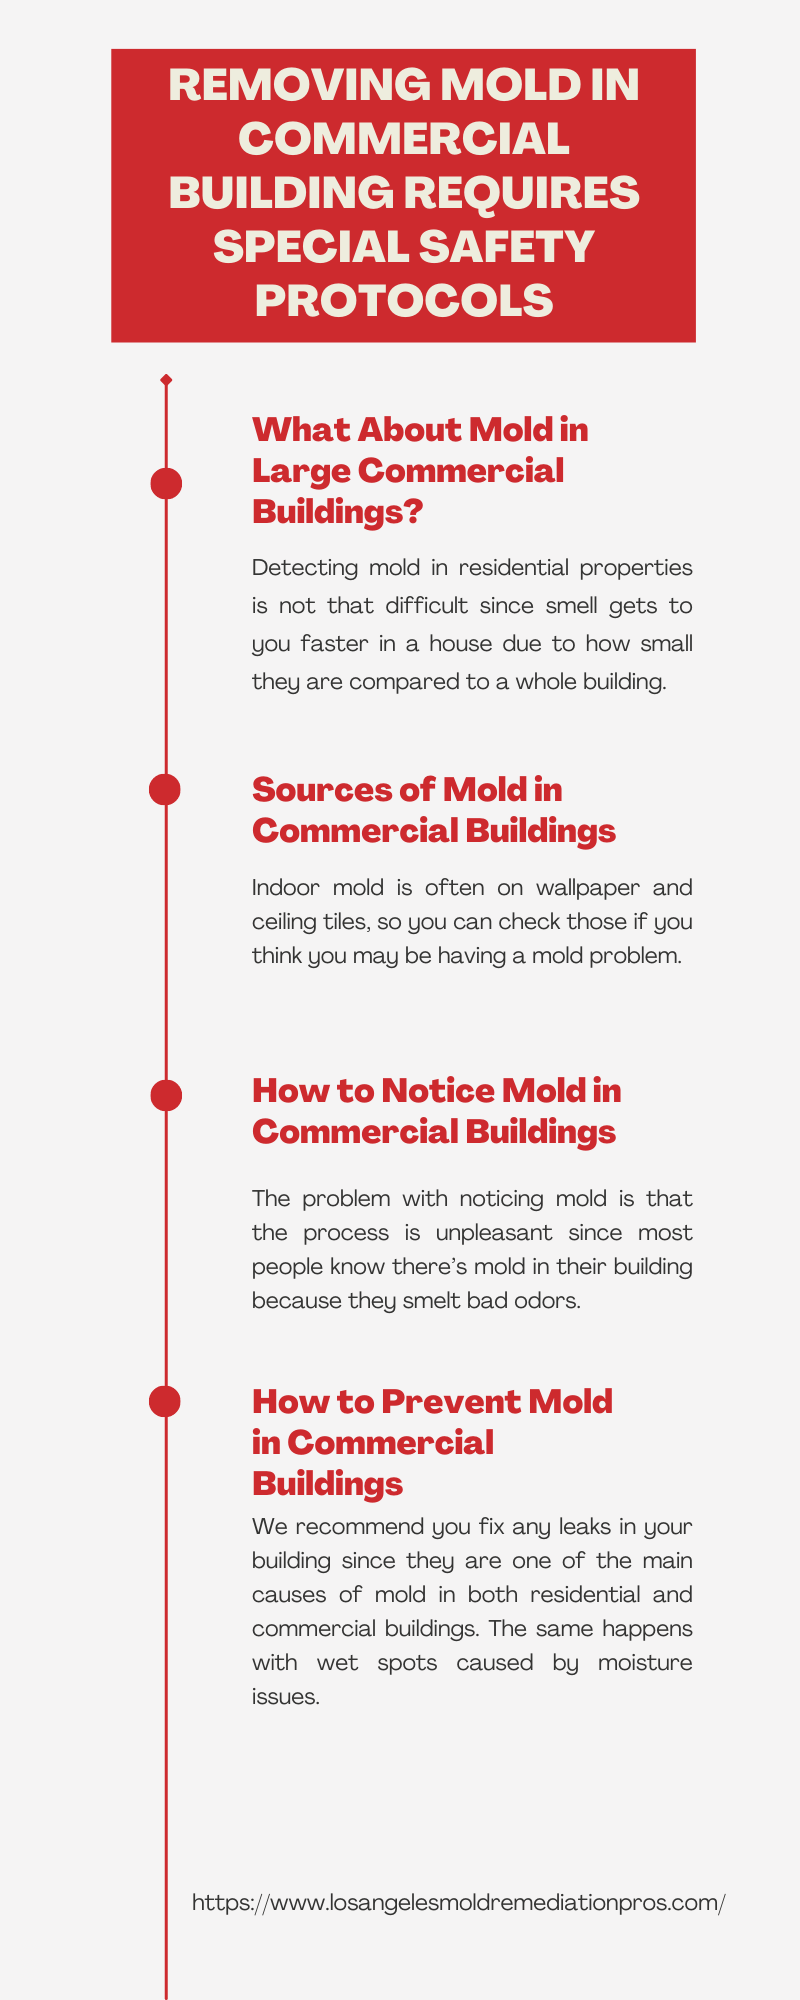 Removing Mold in Commercial Building Requires Special Safety Protocols